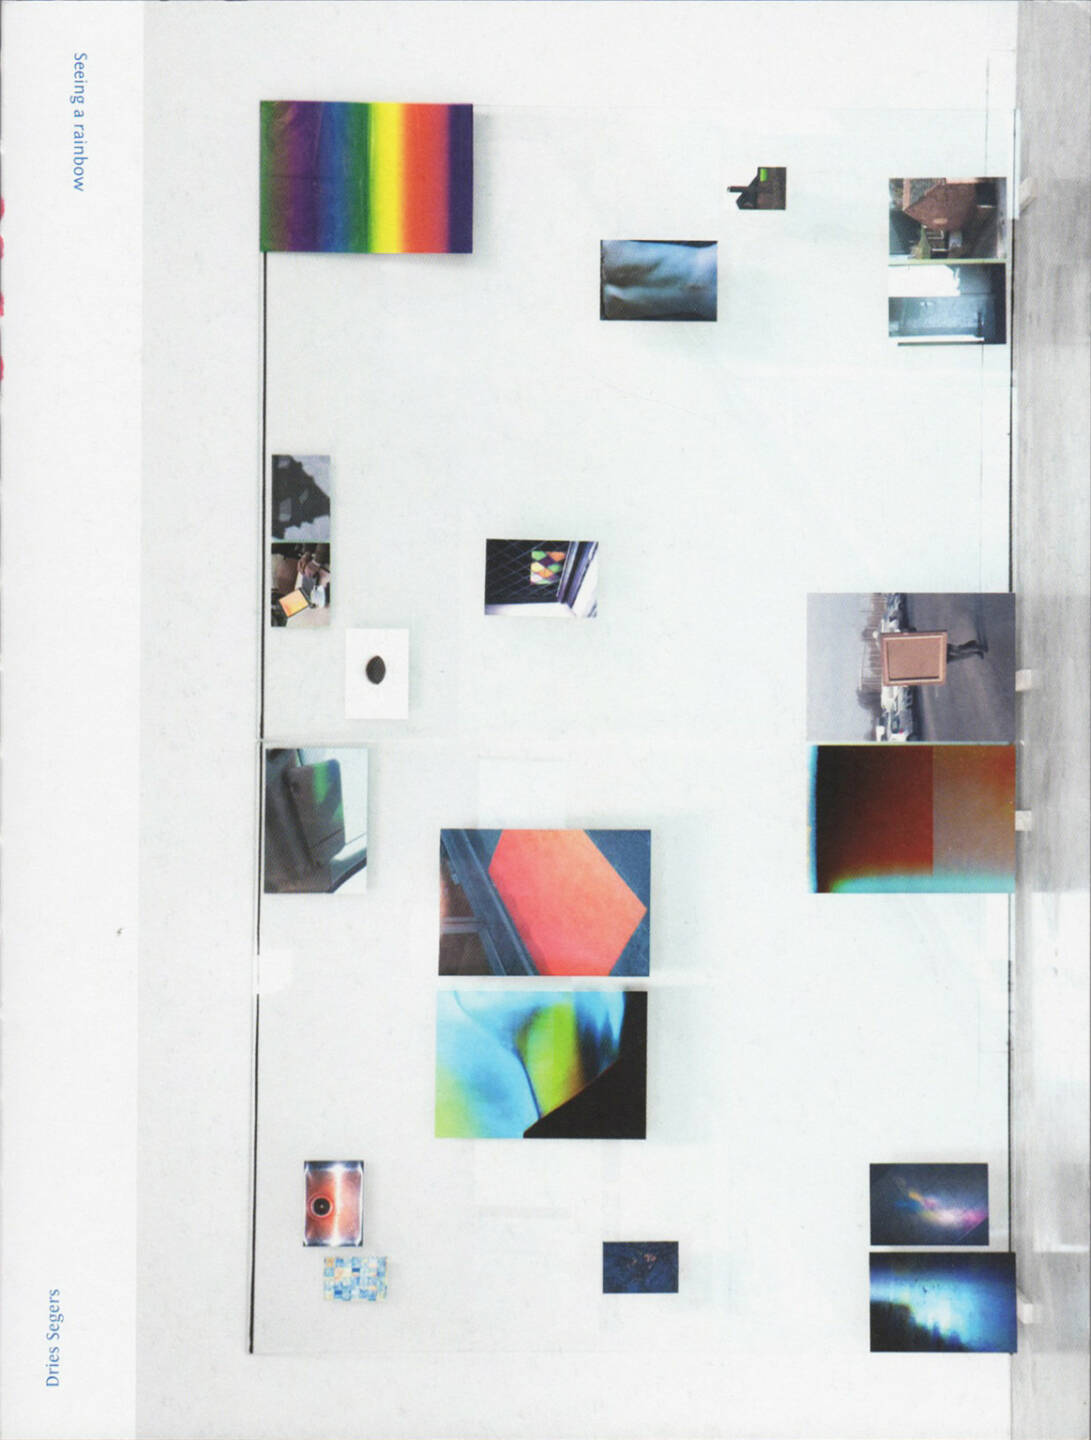 Dries Segers - Seeing a rainbow, Self published 2015, Cover - http://josefchladek.com/book/dries_segers_-_seeing_a_rainbow